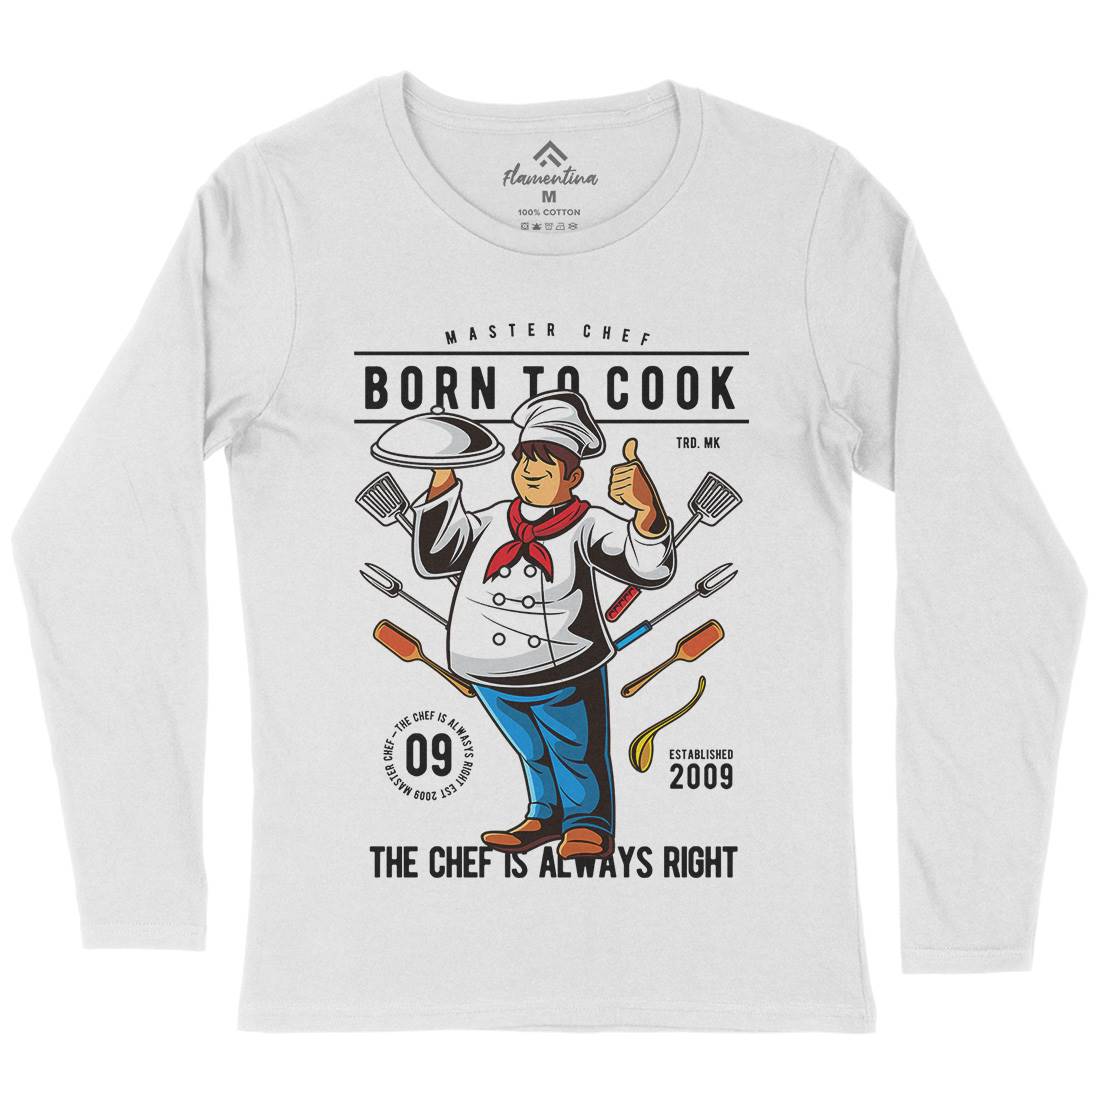 Born To Cook Womens Long Sleeve T-Shirt Work C322